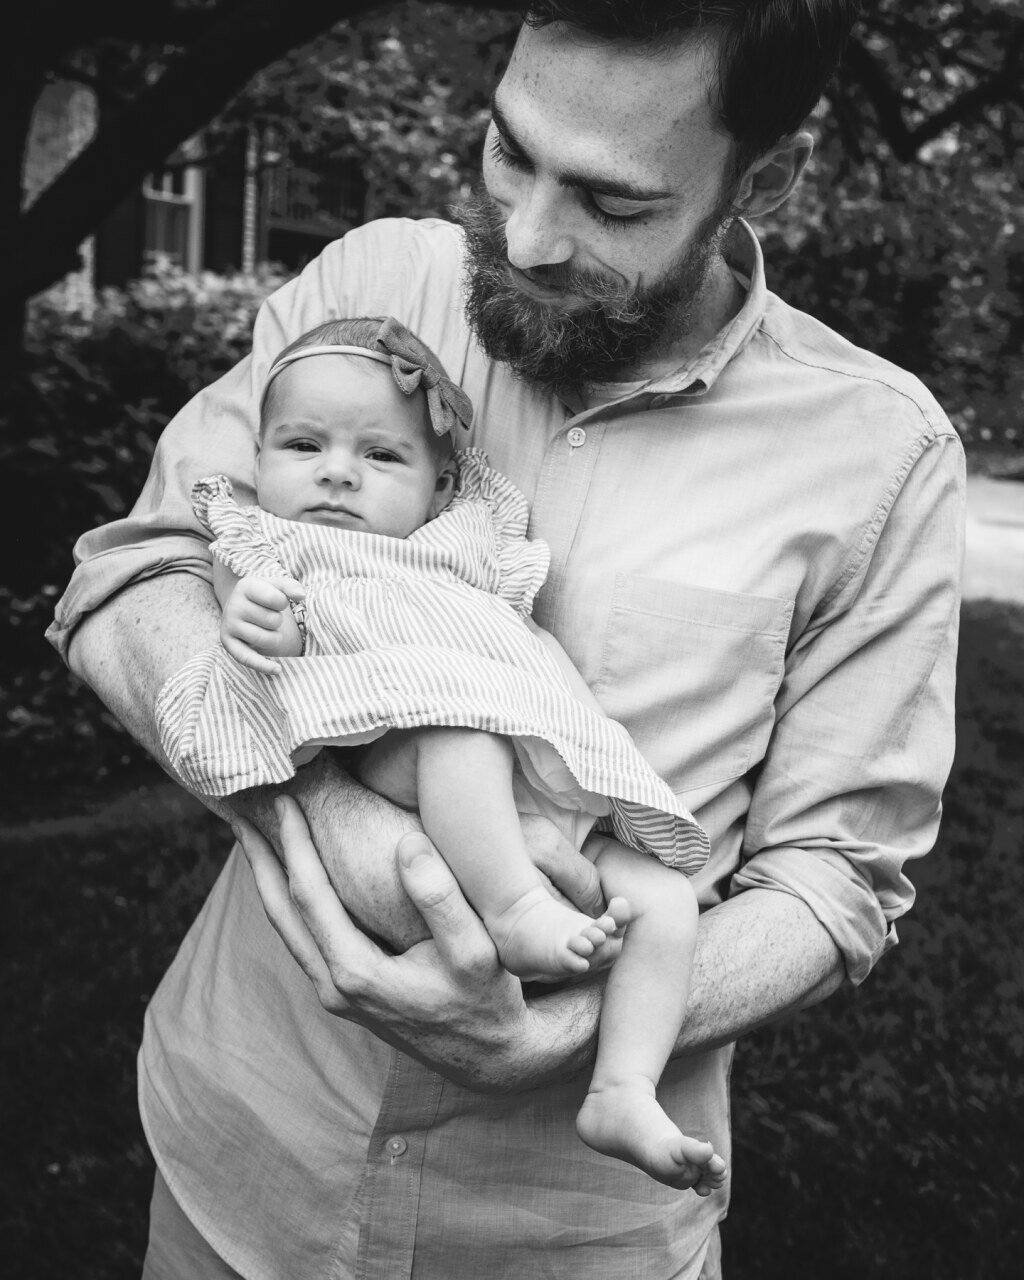 back_and_white_photo_of_dad_yholding_baby_girl.jpg